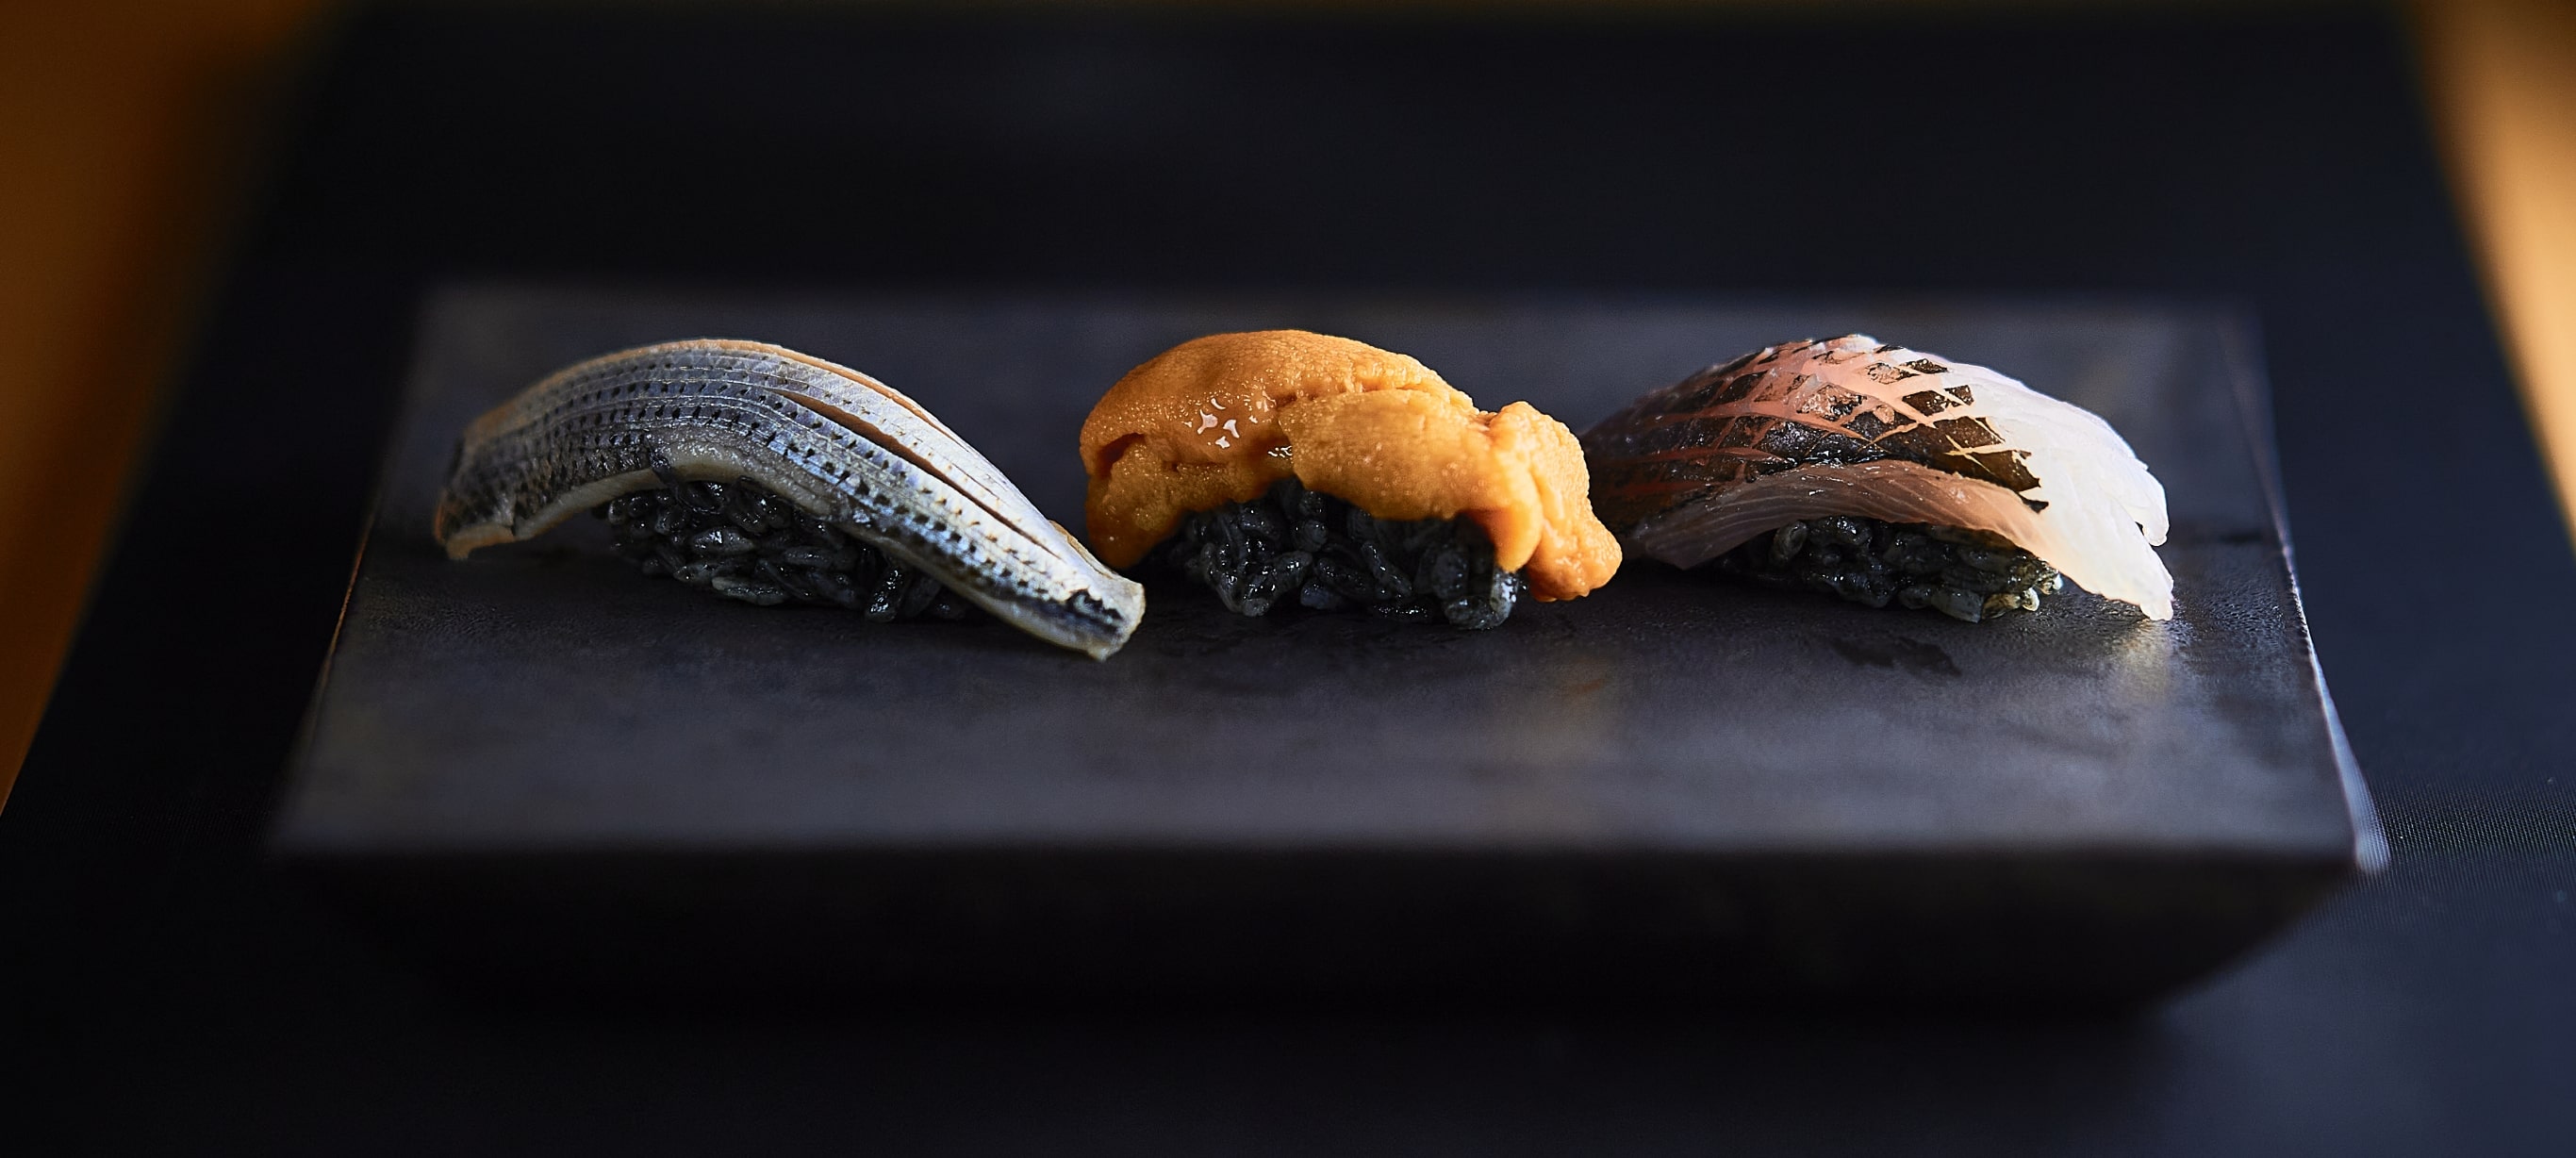 The world's first inner beauty sushi that makes your gut happy.